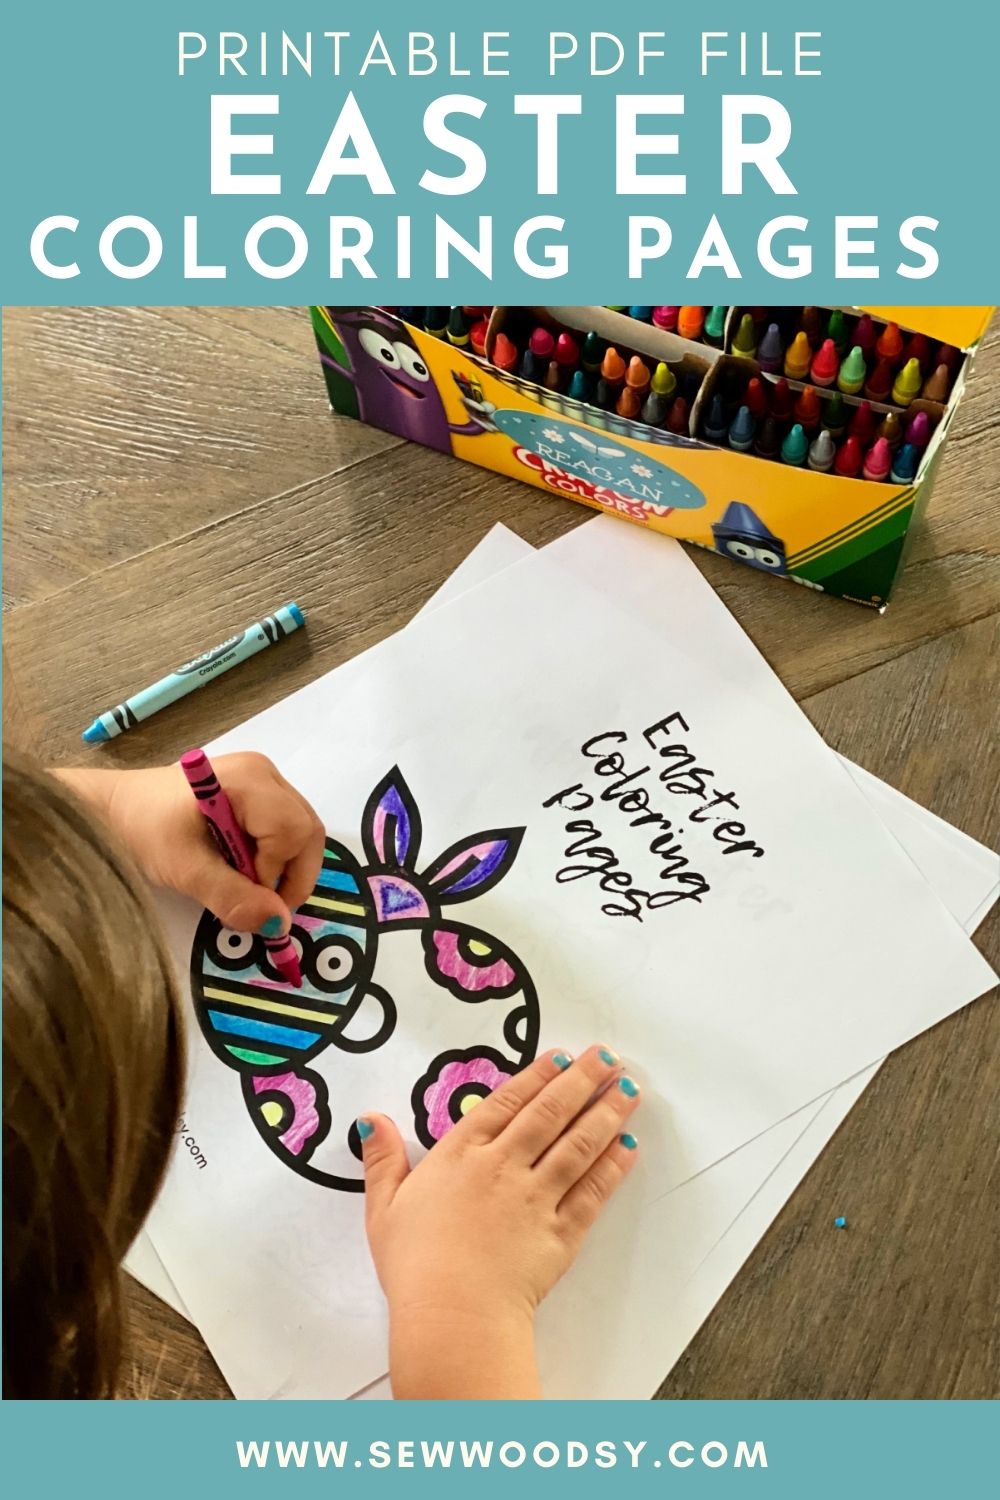 Little girl with blue nails coloring an easter coloring sheet with text on image for Pinterest.